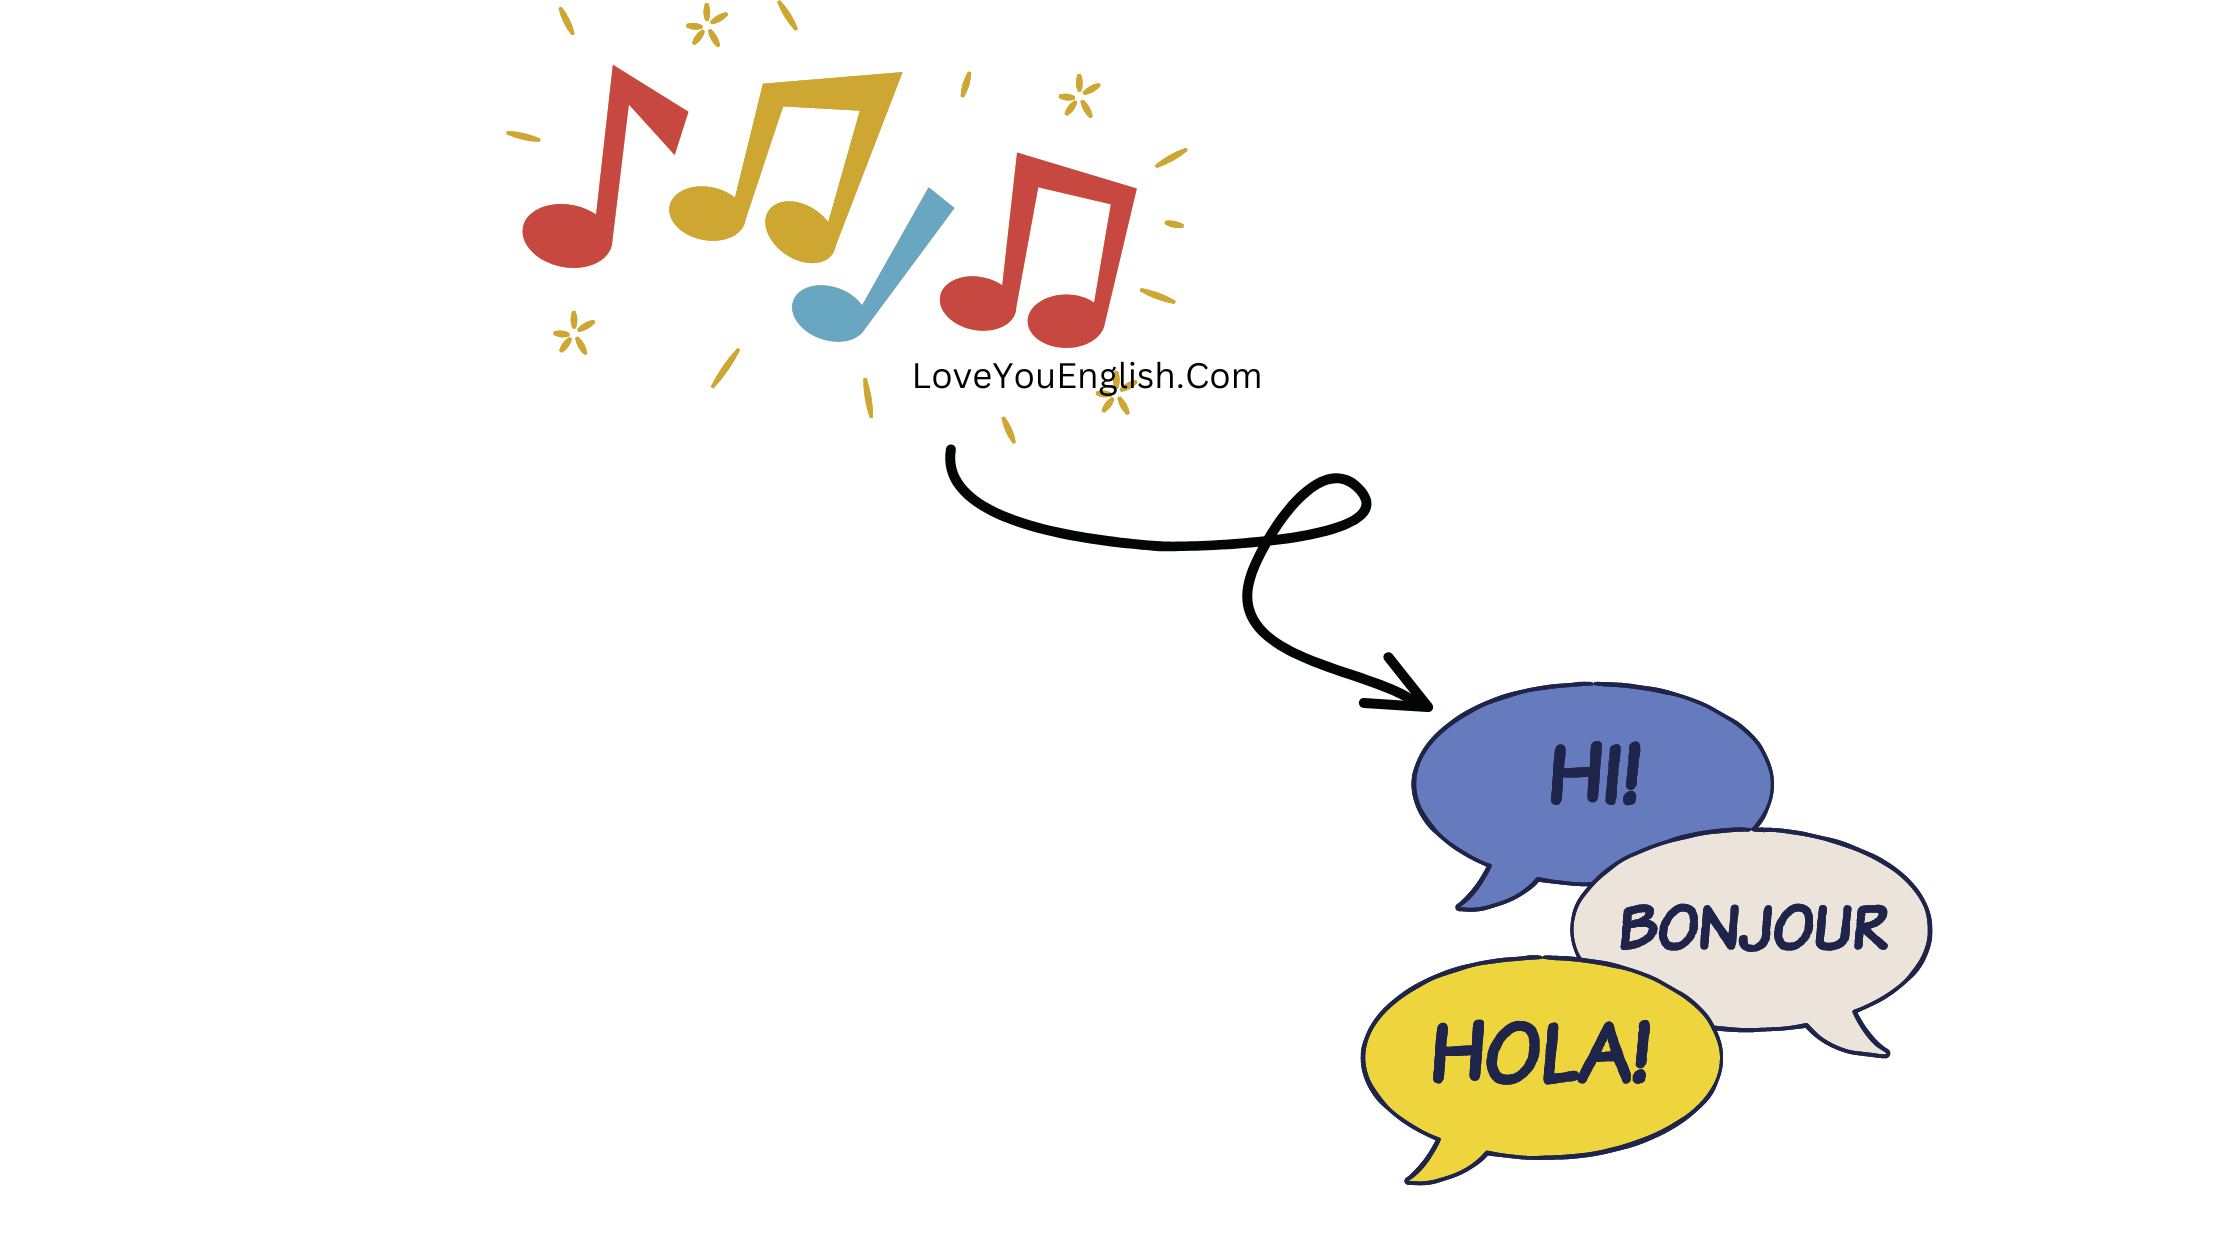 Fascinating Links Between Music and Language